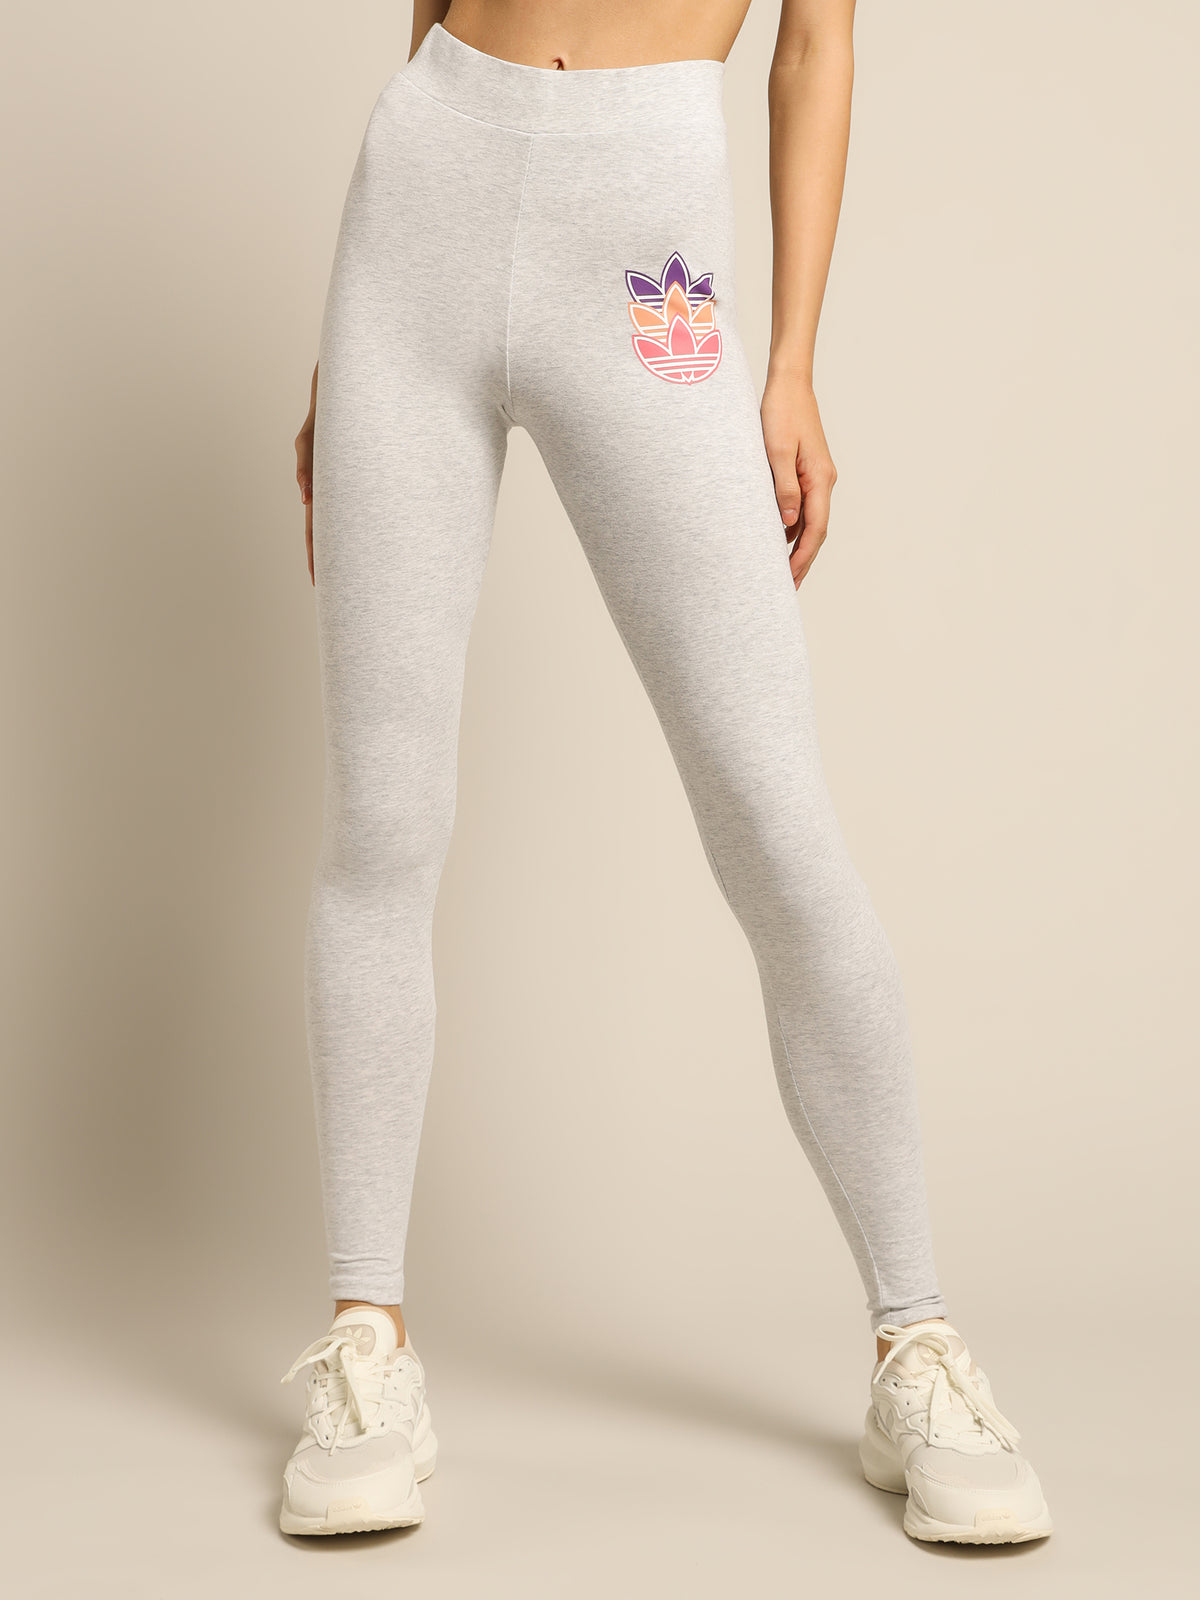 Graphic Tights in Light Grey Heather